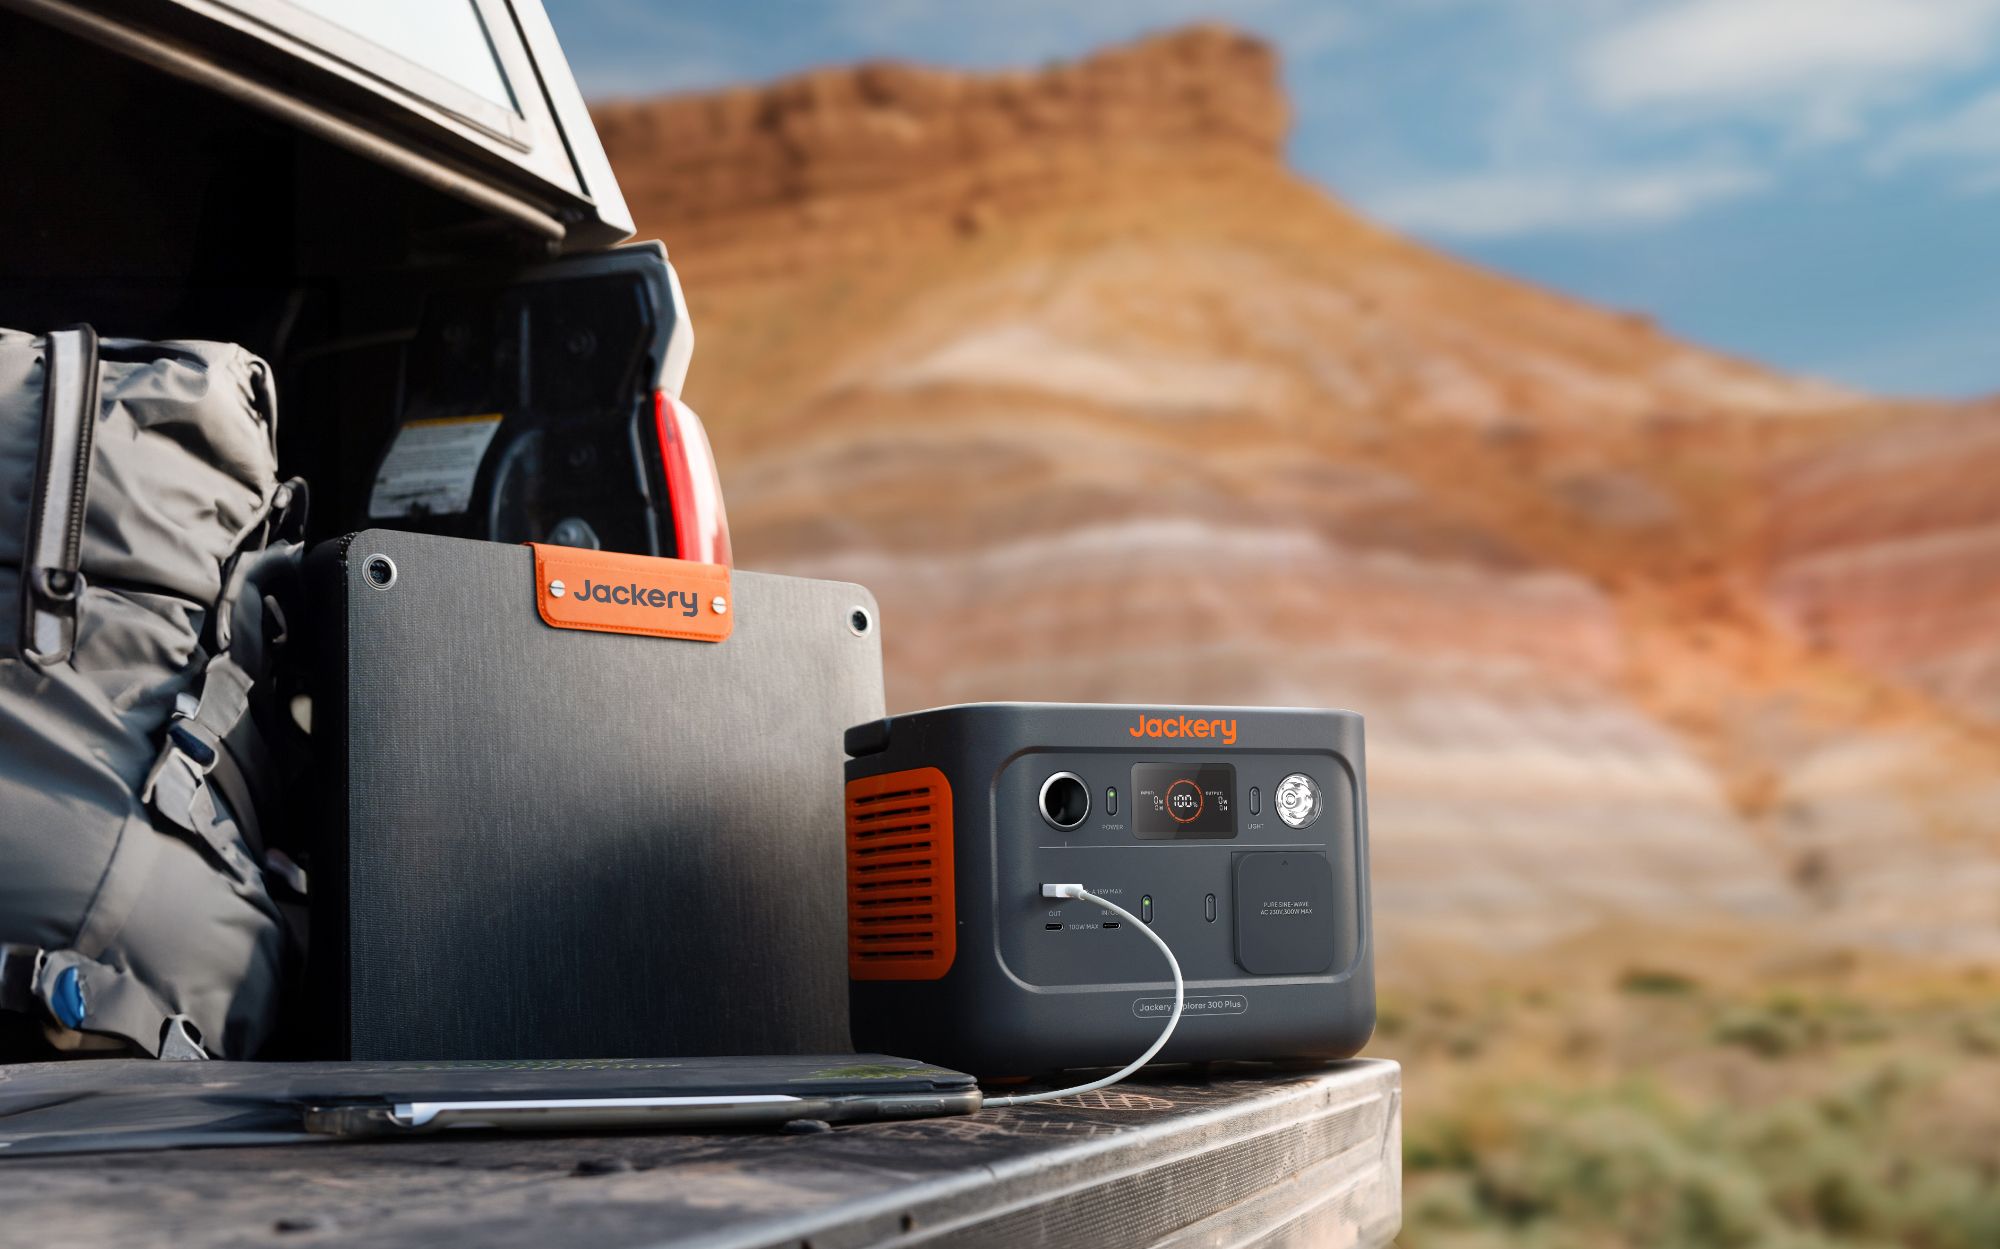 Jackery’s latest solar power stations are more portable and powerful